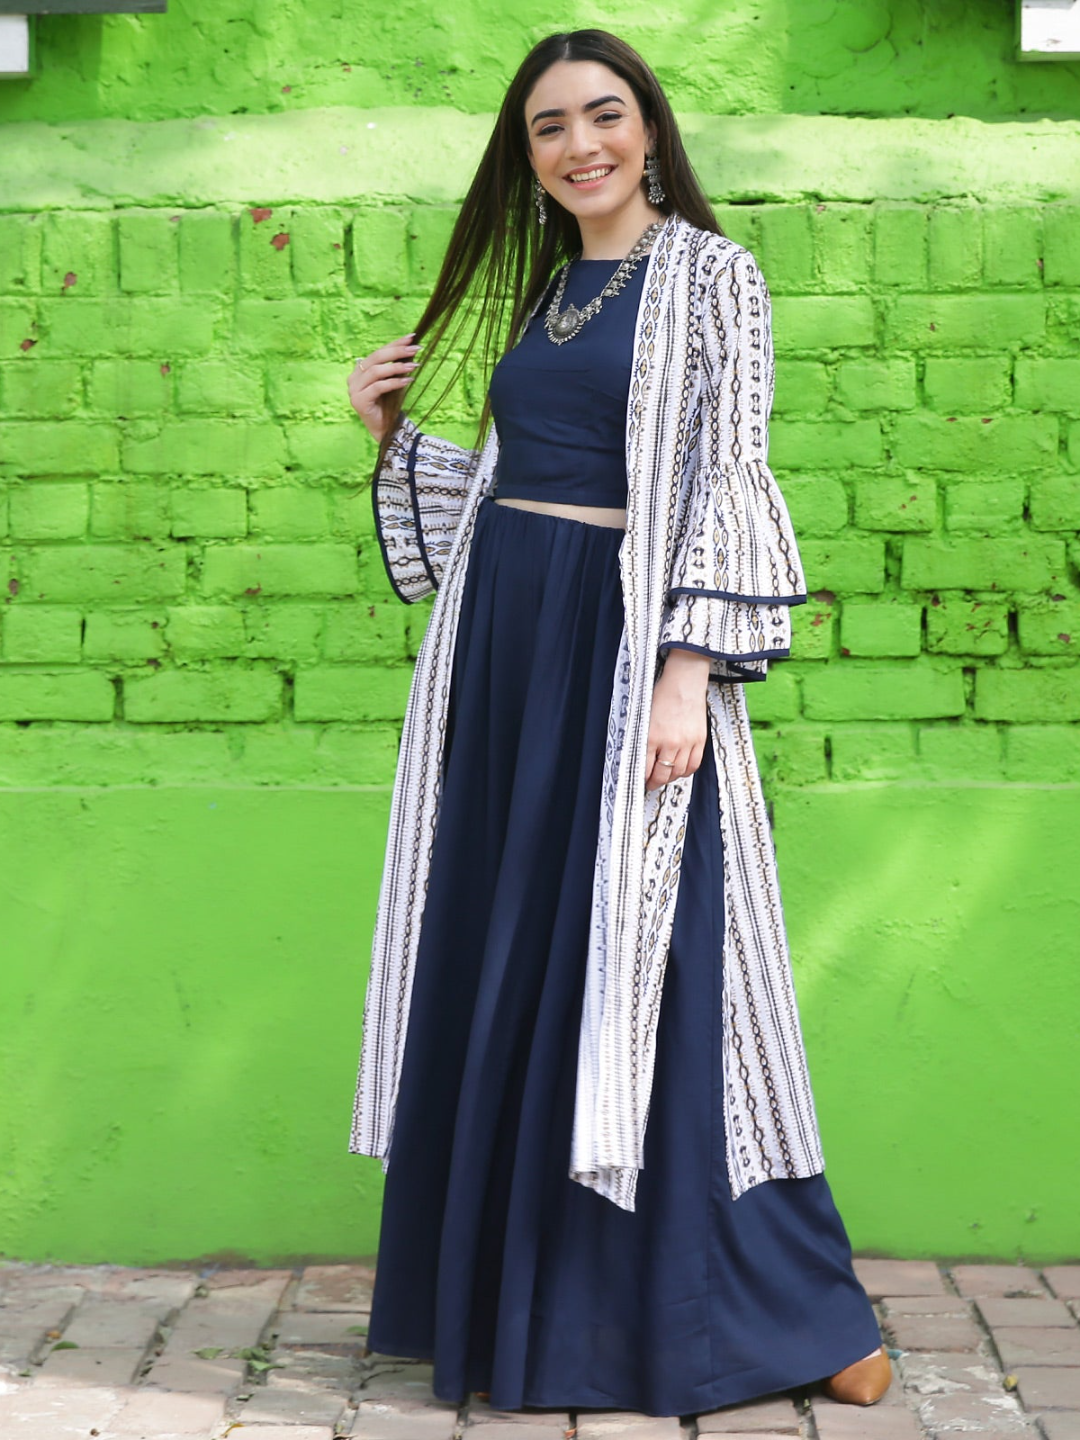 Blue Top Skirt Set With Bell Sleeves Shrug